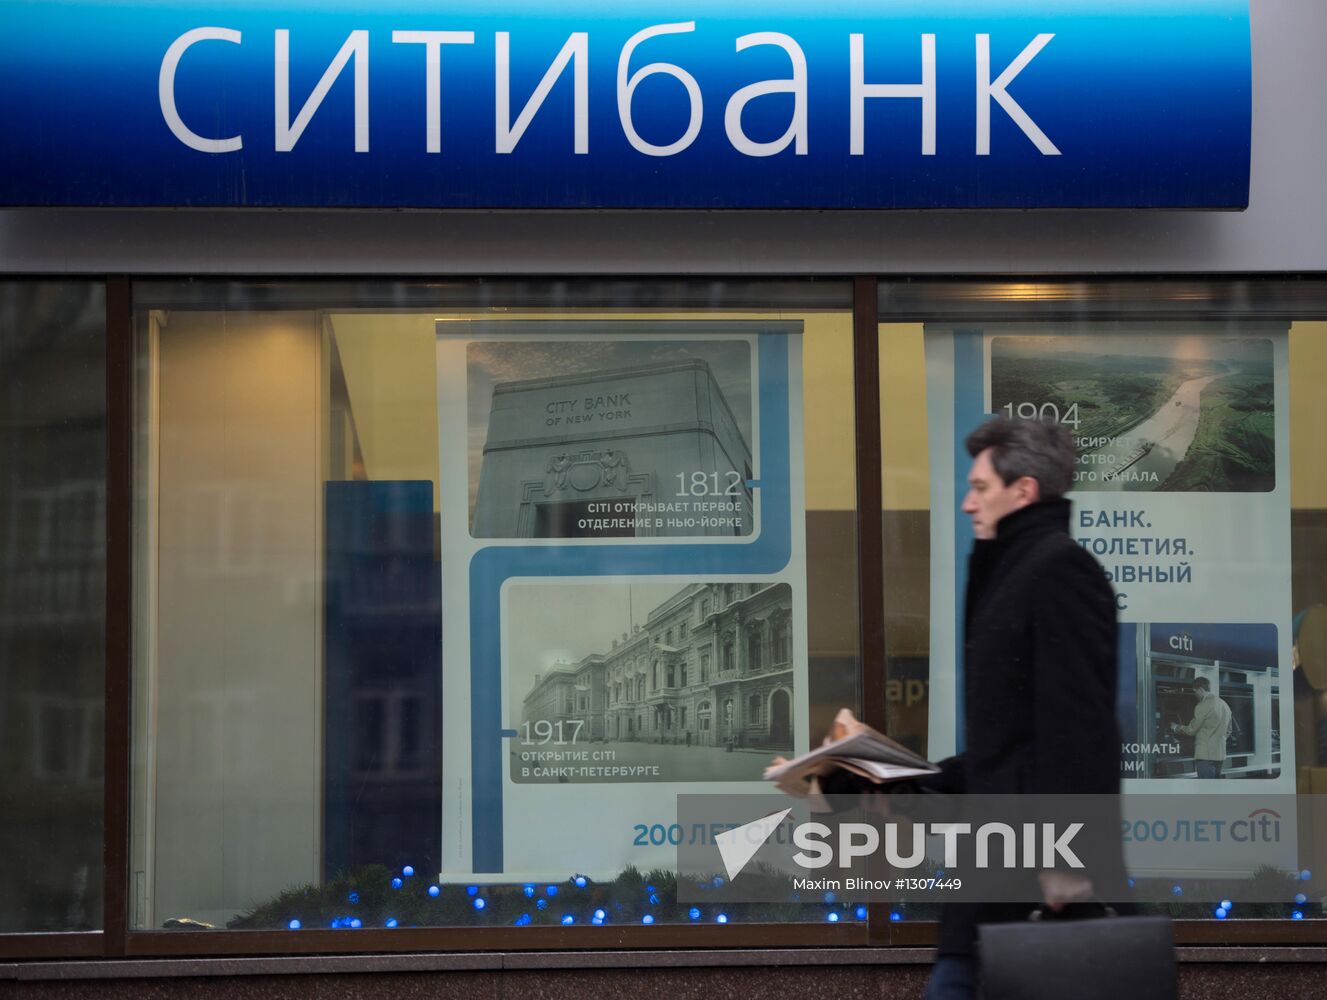 Citibank branch in Moscow